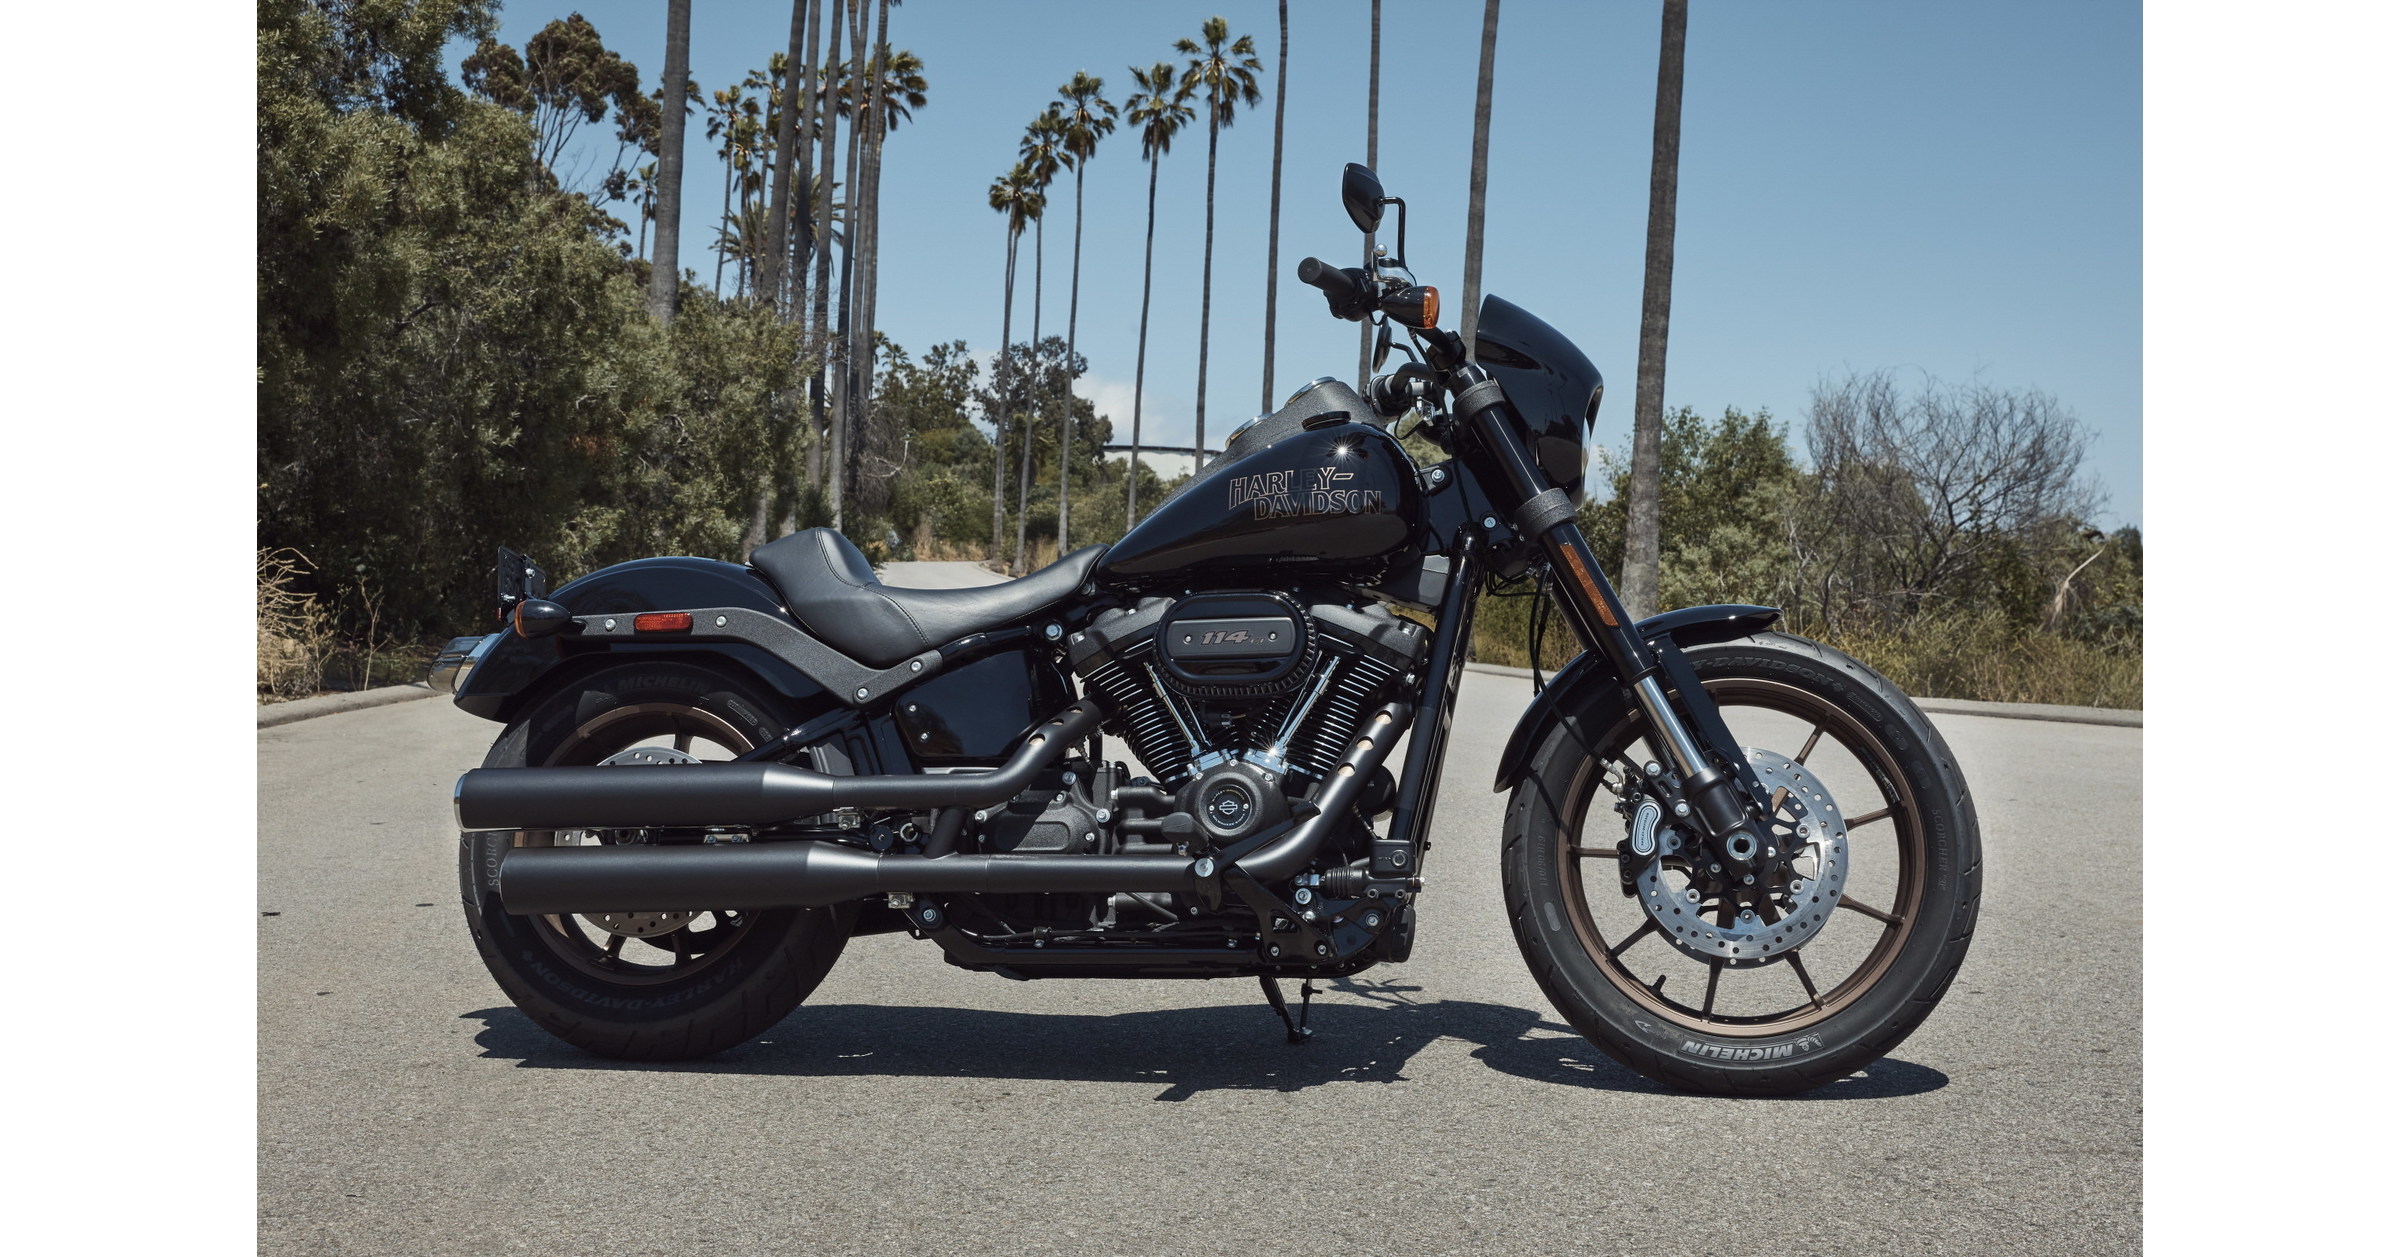 Harley Davidson Launches New Motorcycle Models And Technology For 2020